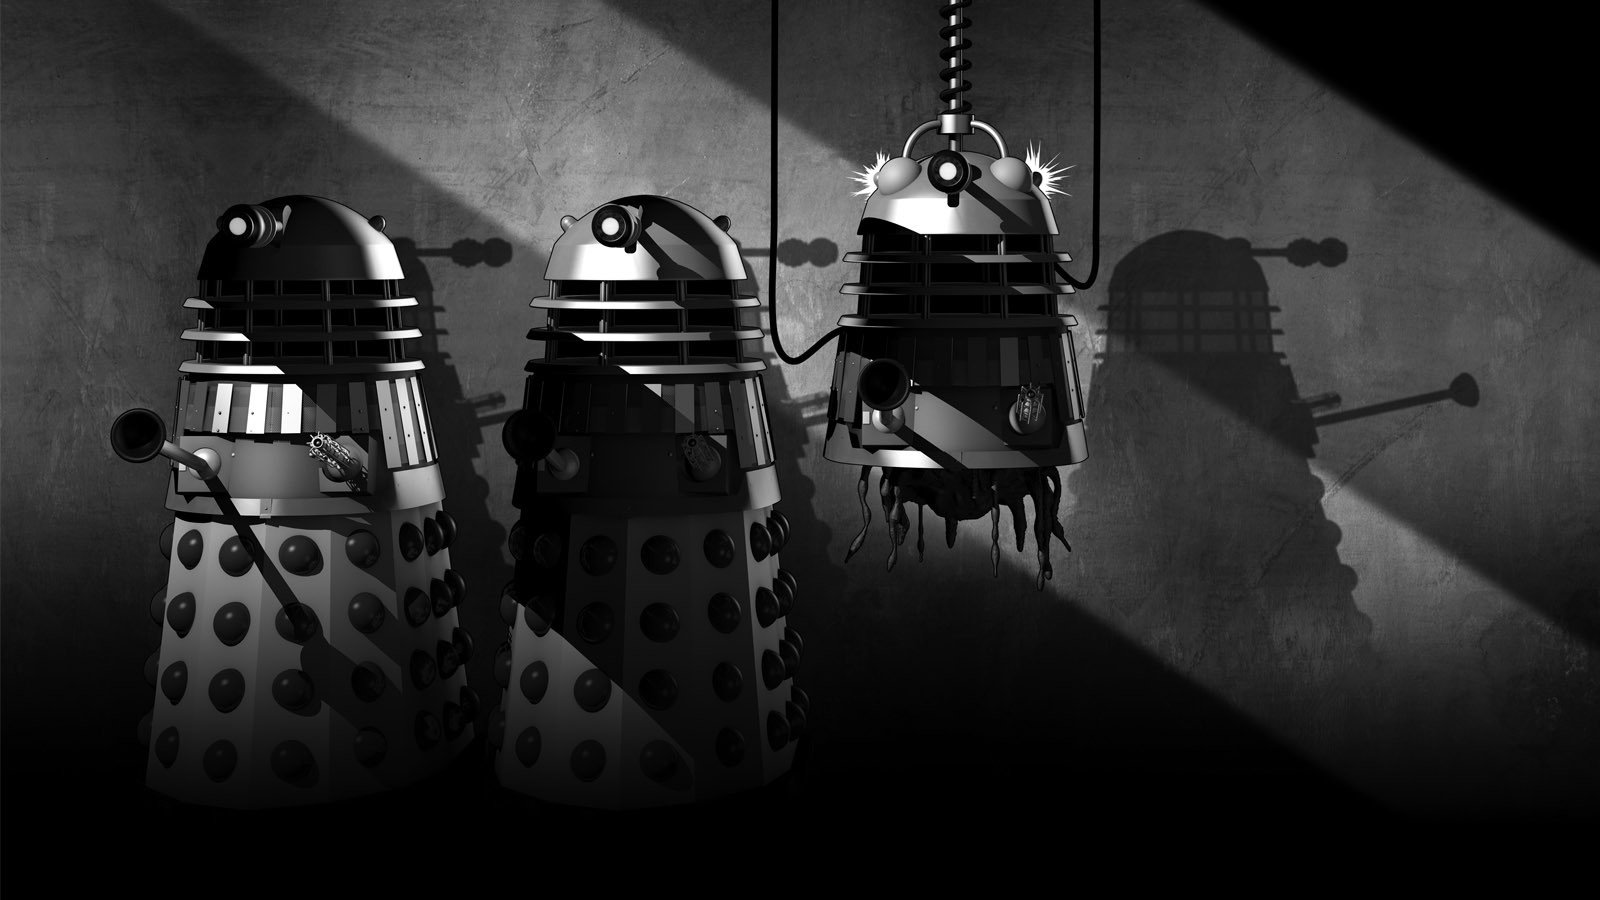 It Looks Like Doctor Who Missing Episode Animations Will Be on BBC iPlayer Too!